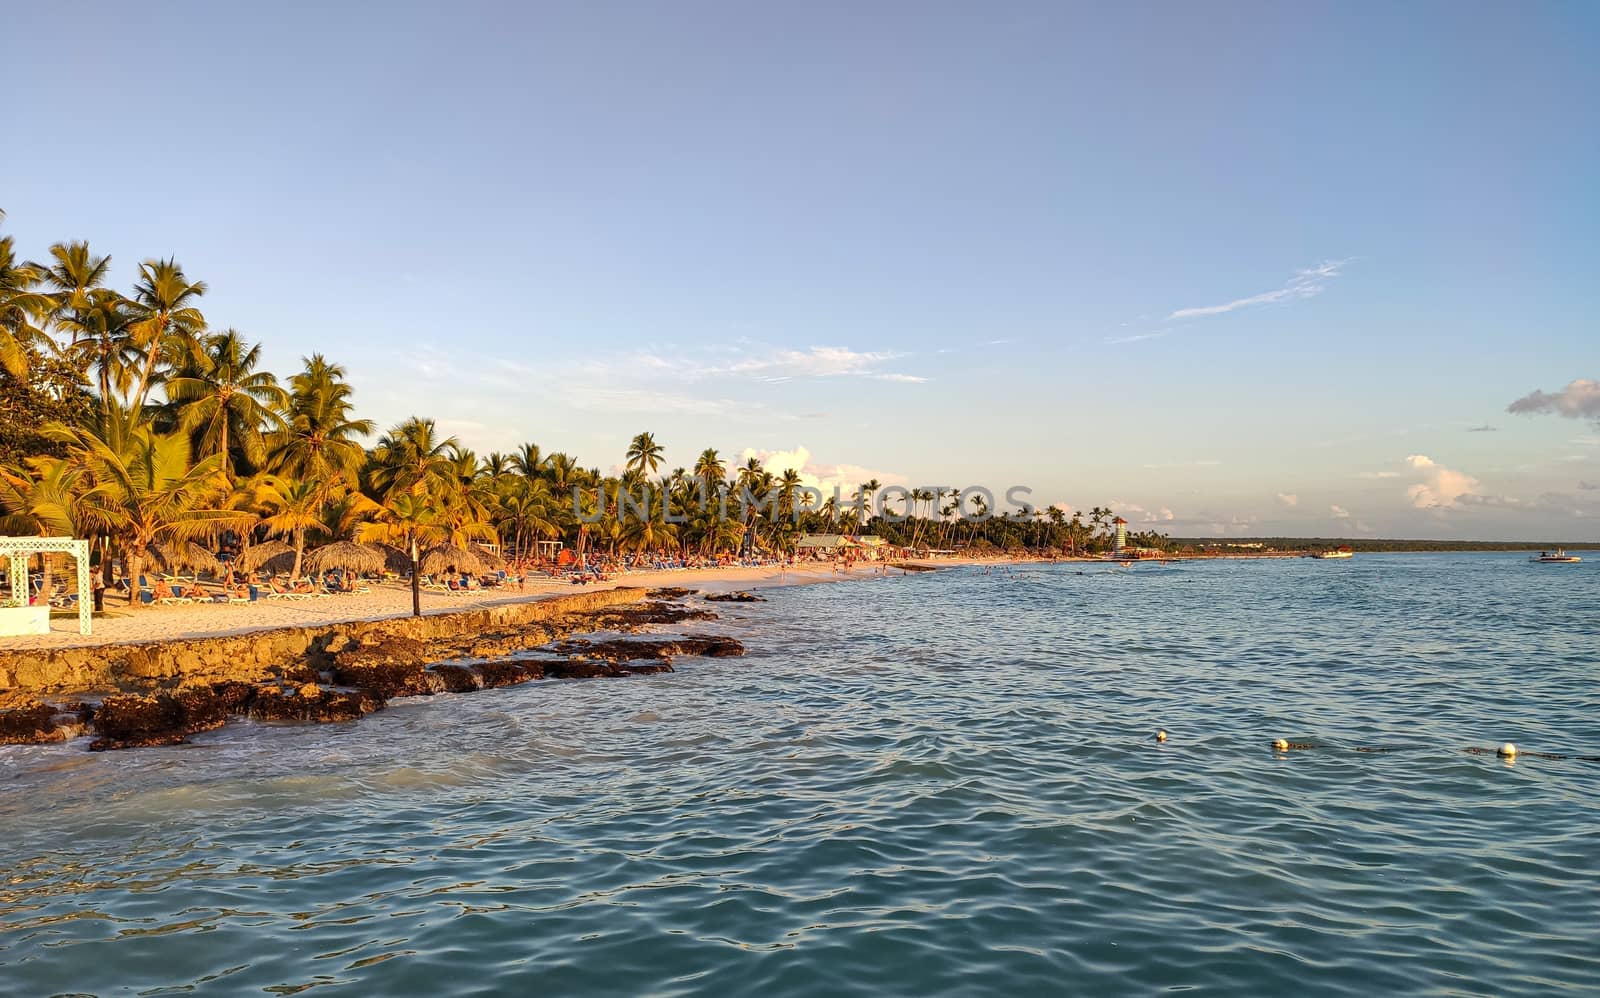 View of the seashore of Dominicus beach (Bayahibe) in the Dominican Republic at sunset